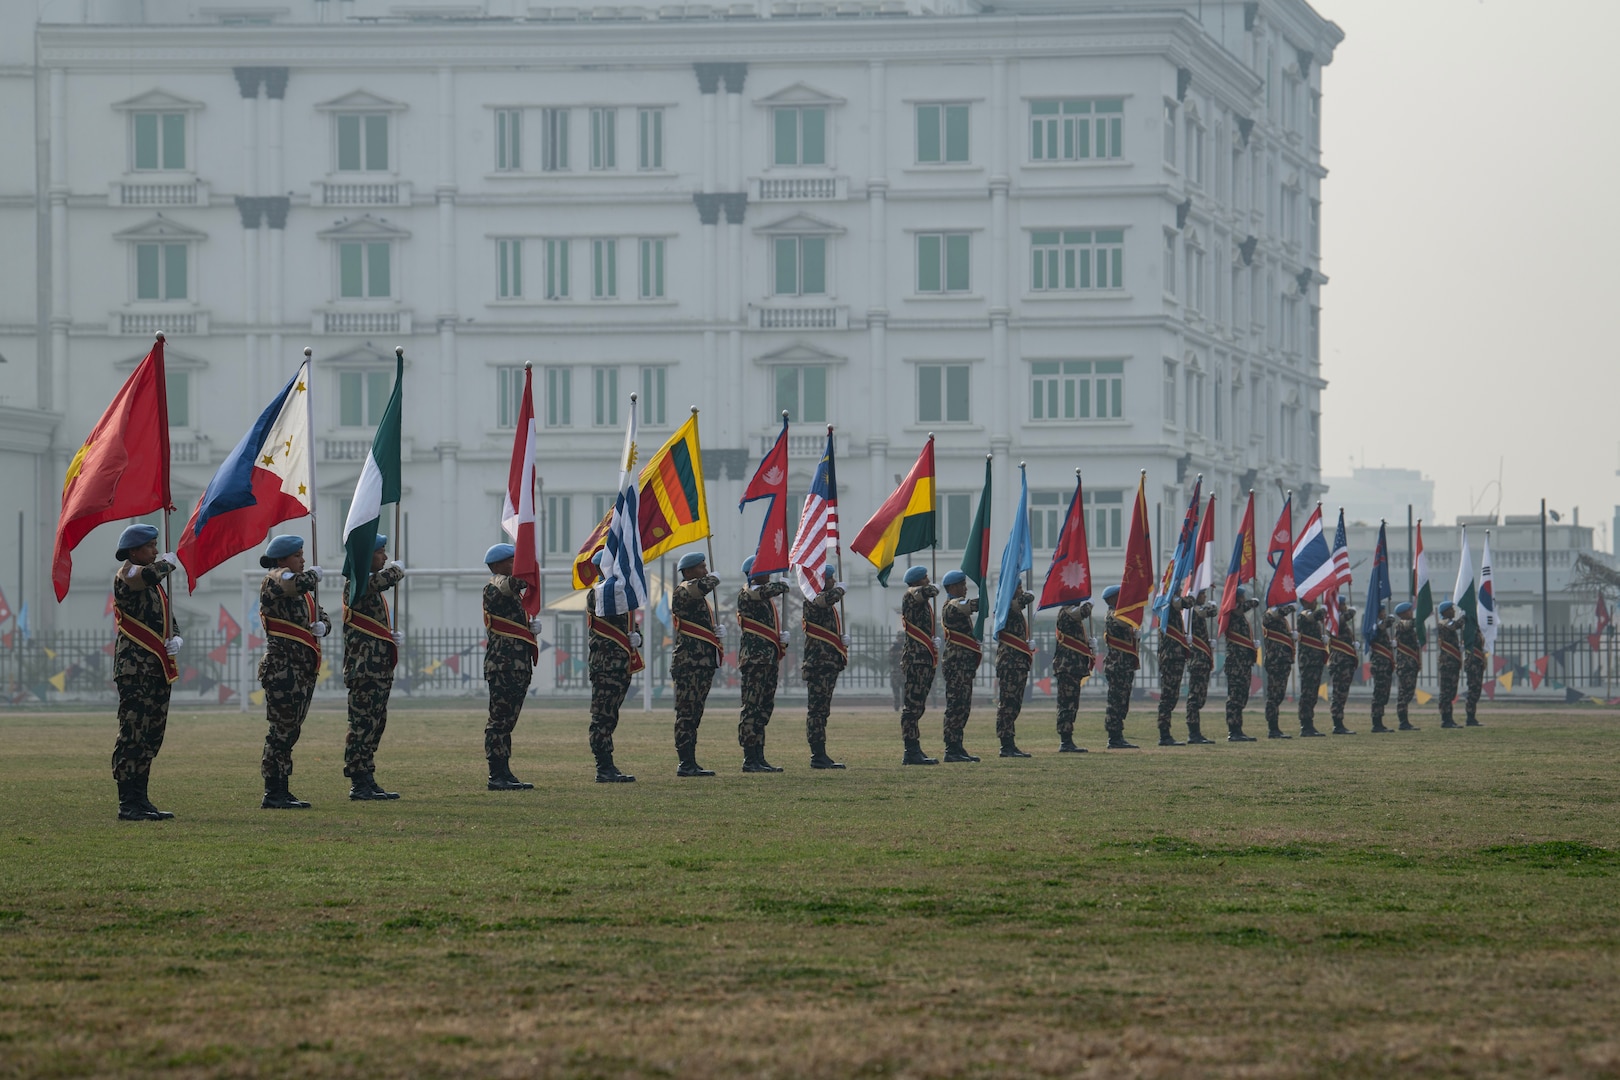 Combined service members from 19 countries participate in the opening ceremony of Exercise Shanti Prayas IV, a Multinational Peacekeeping Exercise, at the Nepali Army Headquarters on Feb. 20, 2024. Shanti Prayas IV is a multinational peacekeeping exercise sponsored by the Nepali Army and U.S. Indo-Pacific Command and is the latest in a series of exercises designed to support peacekeeping operations. (U.S. Marine Corps photo by Lance Cpl John Hall)